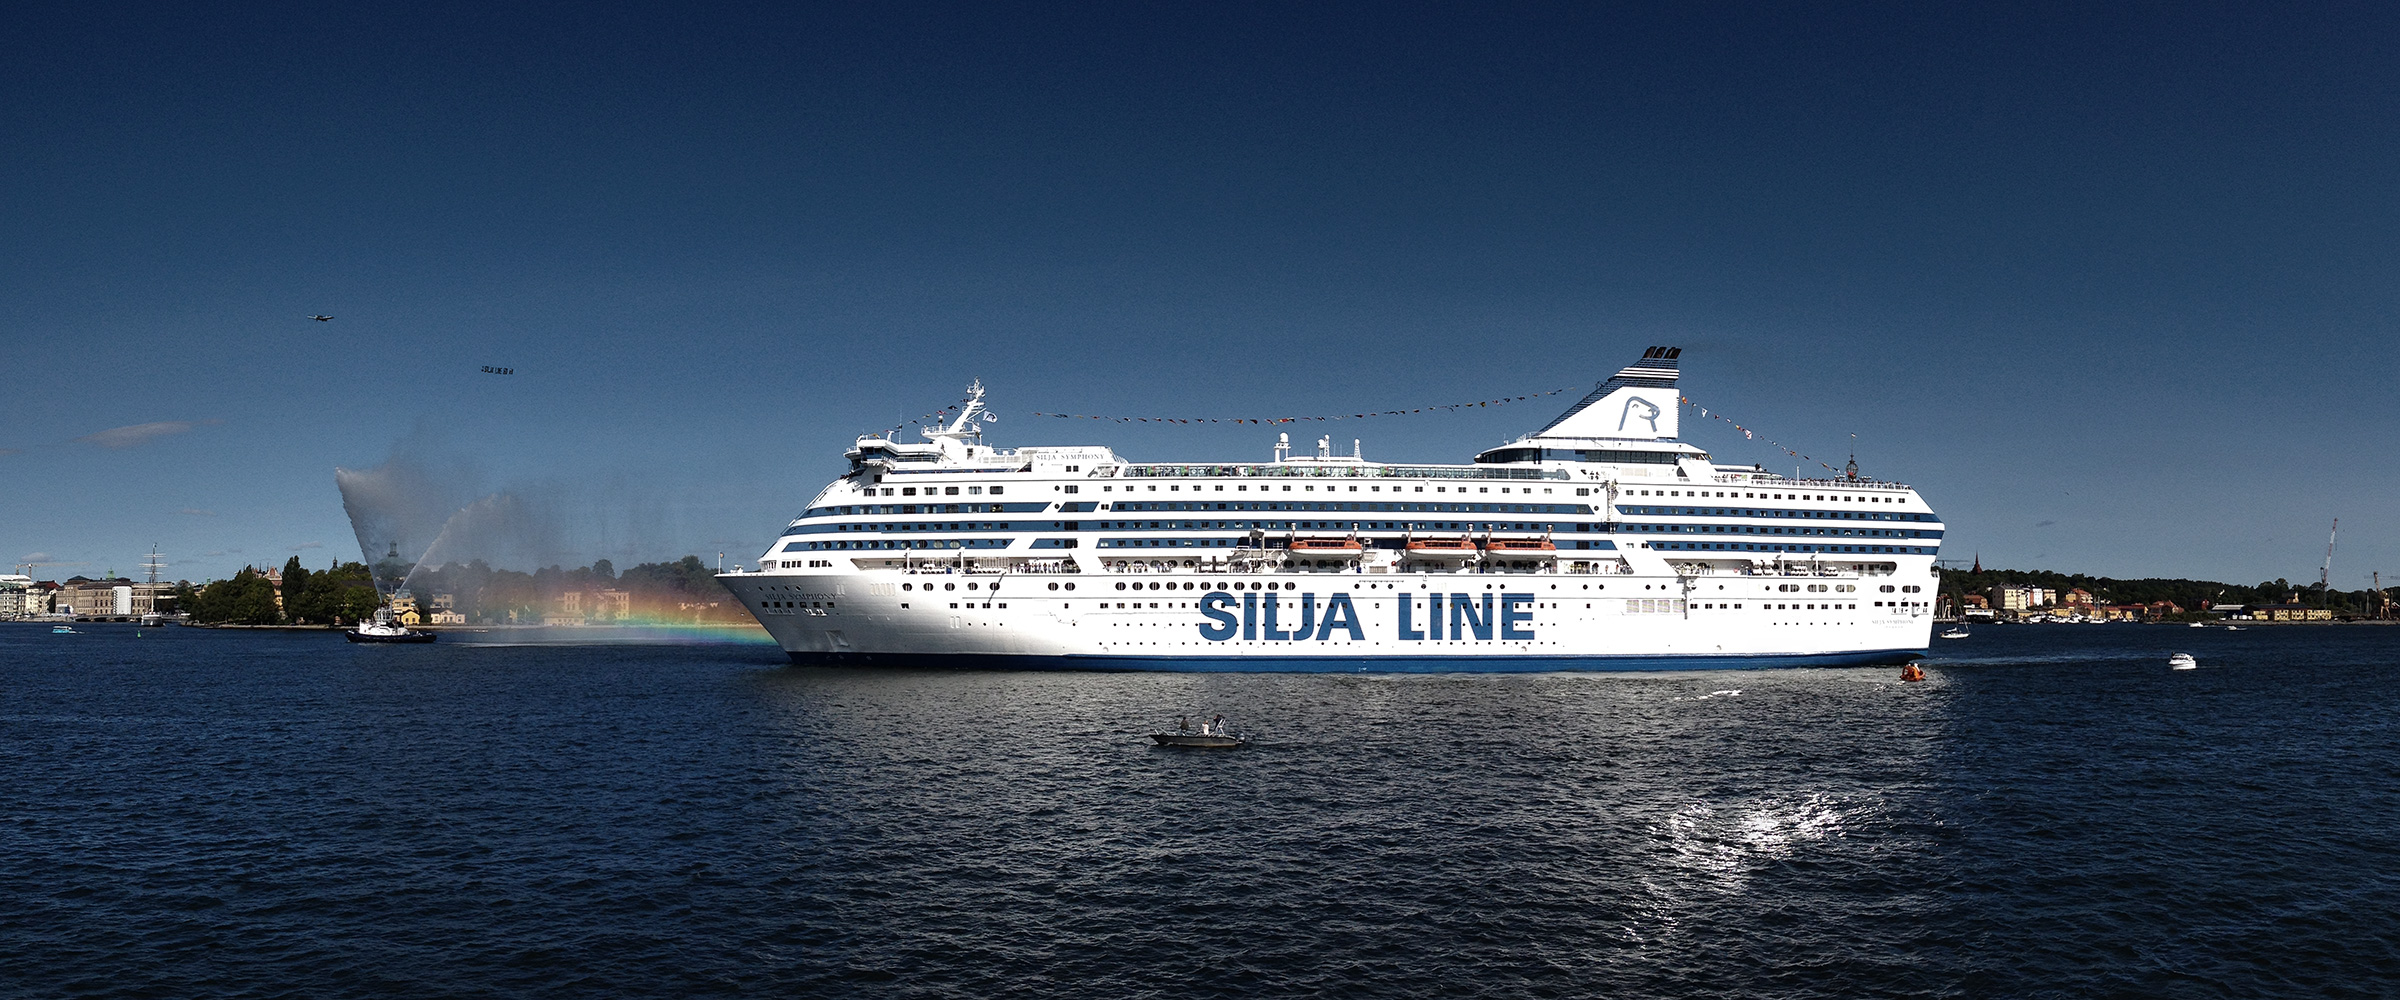 PANORAMA DIARY | Iphoneography blog | Silja Line Anniversary, Stockholm, Sweden